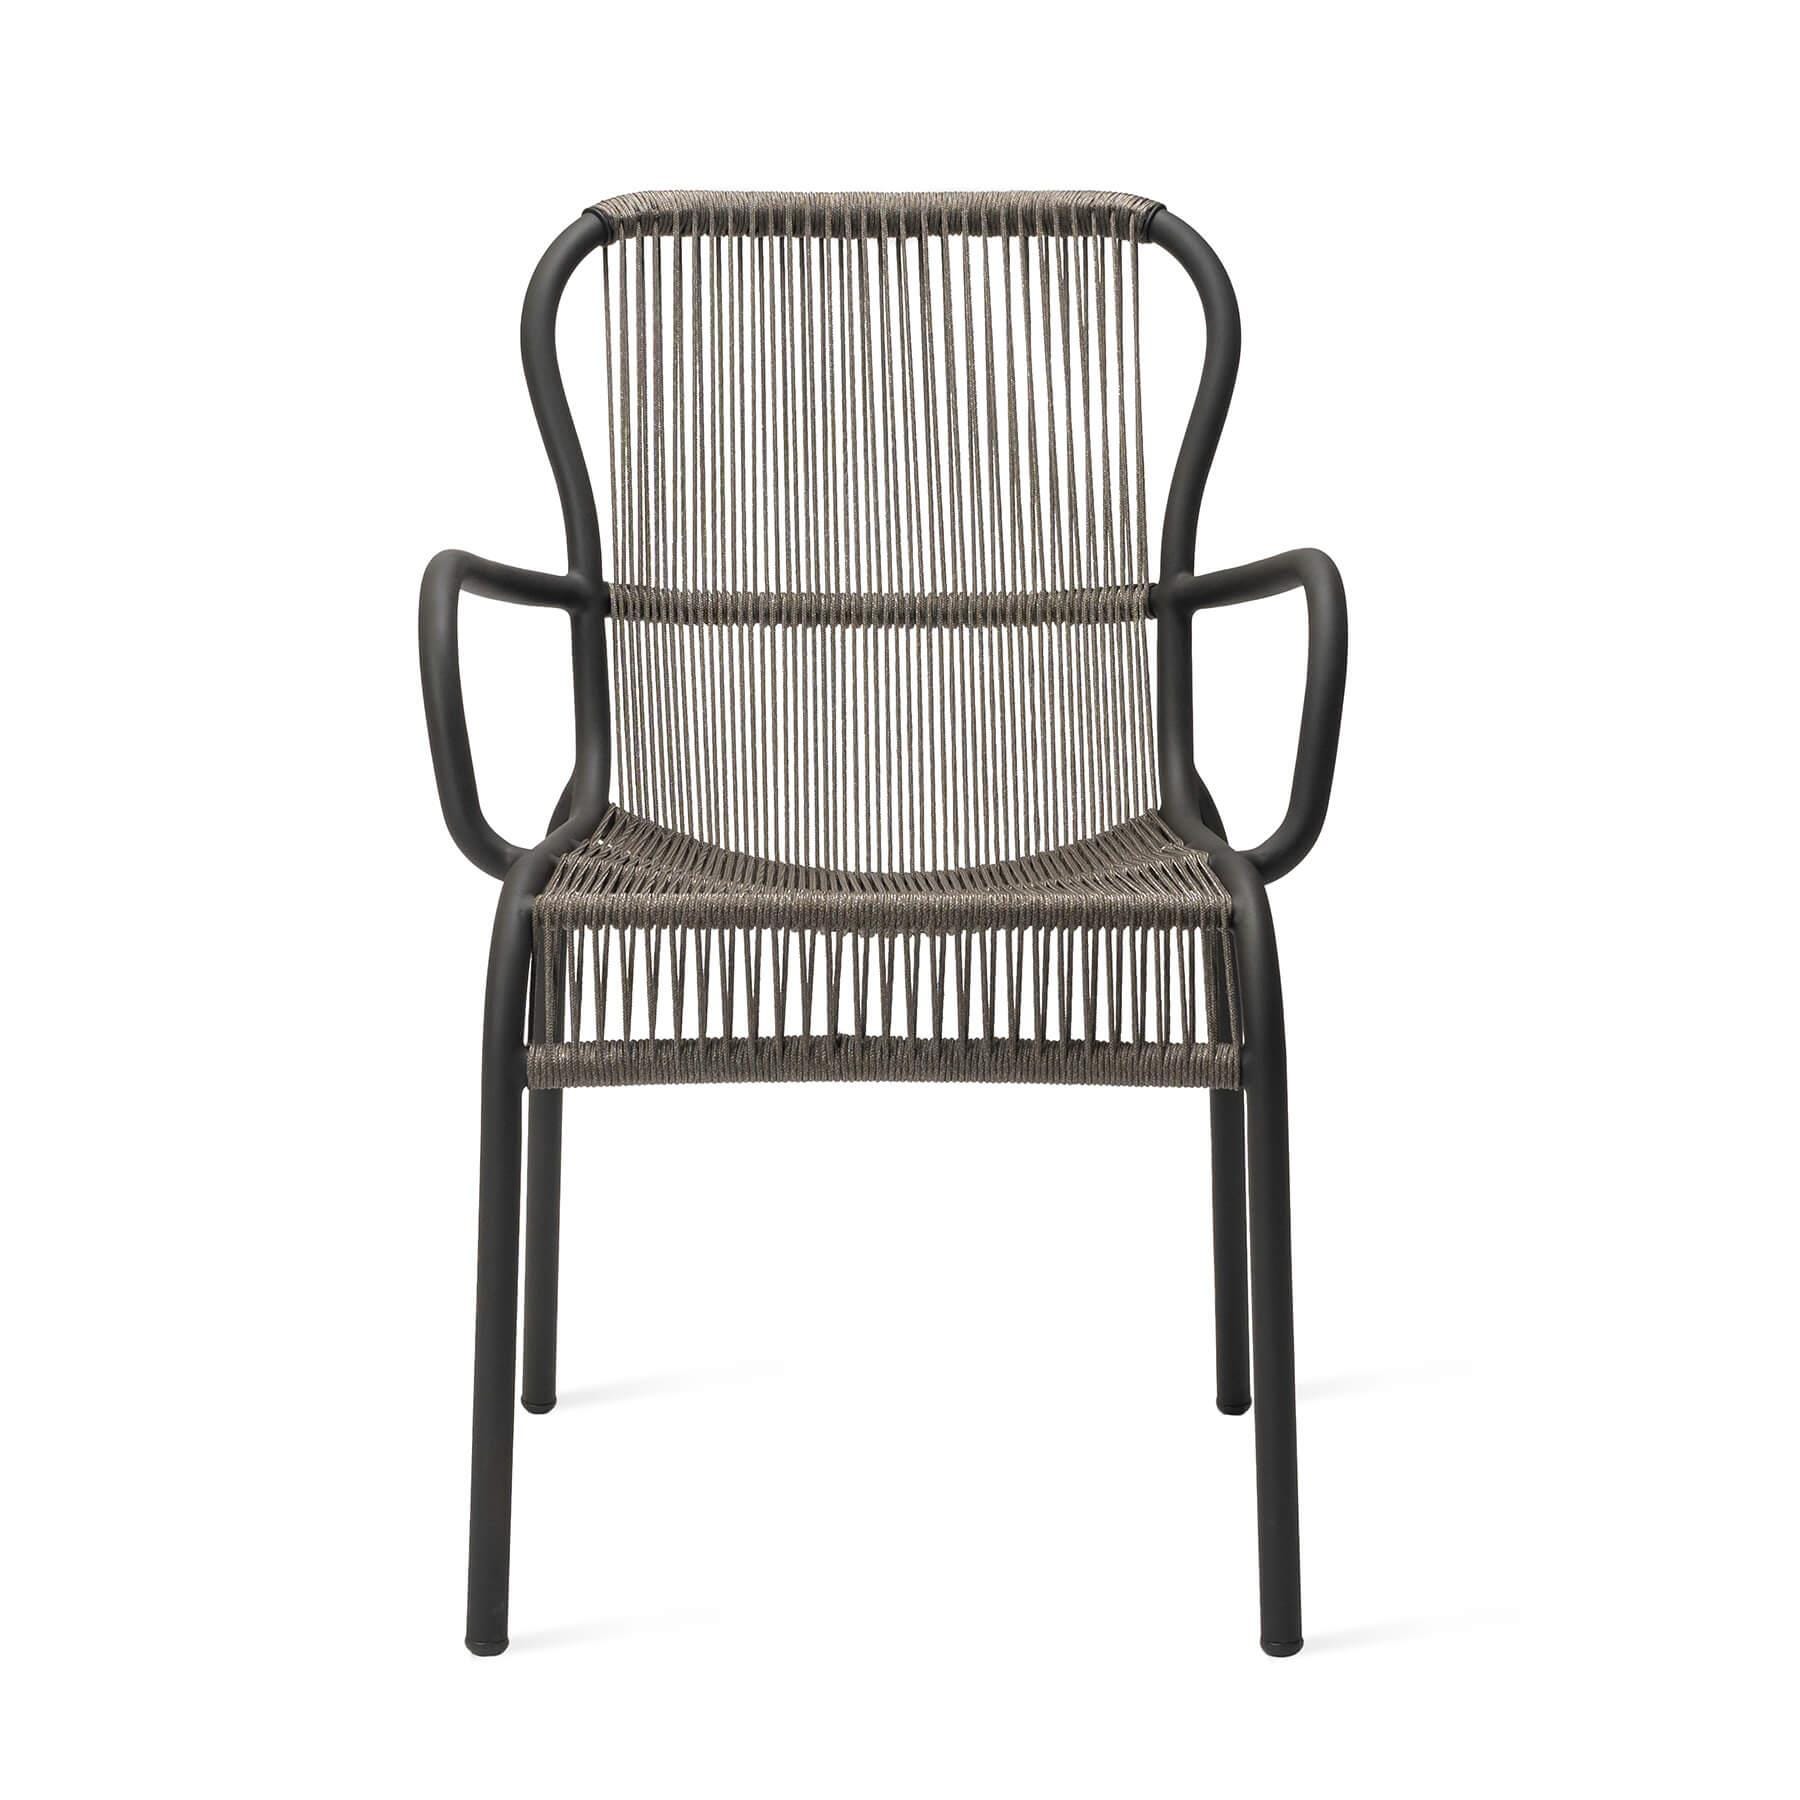 Vincent Sheppard Loop Garden Dining Chair Fossil Grey Designer Furniture From Holloways Of Ludlow